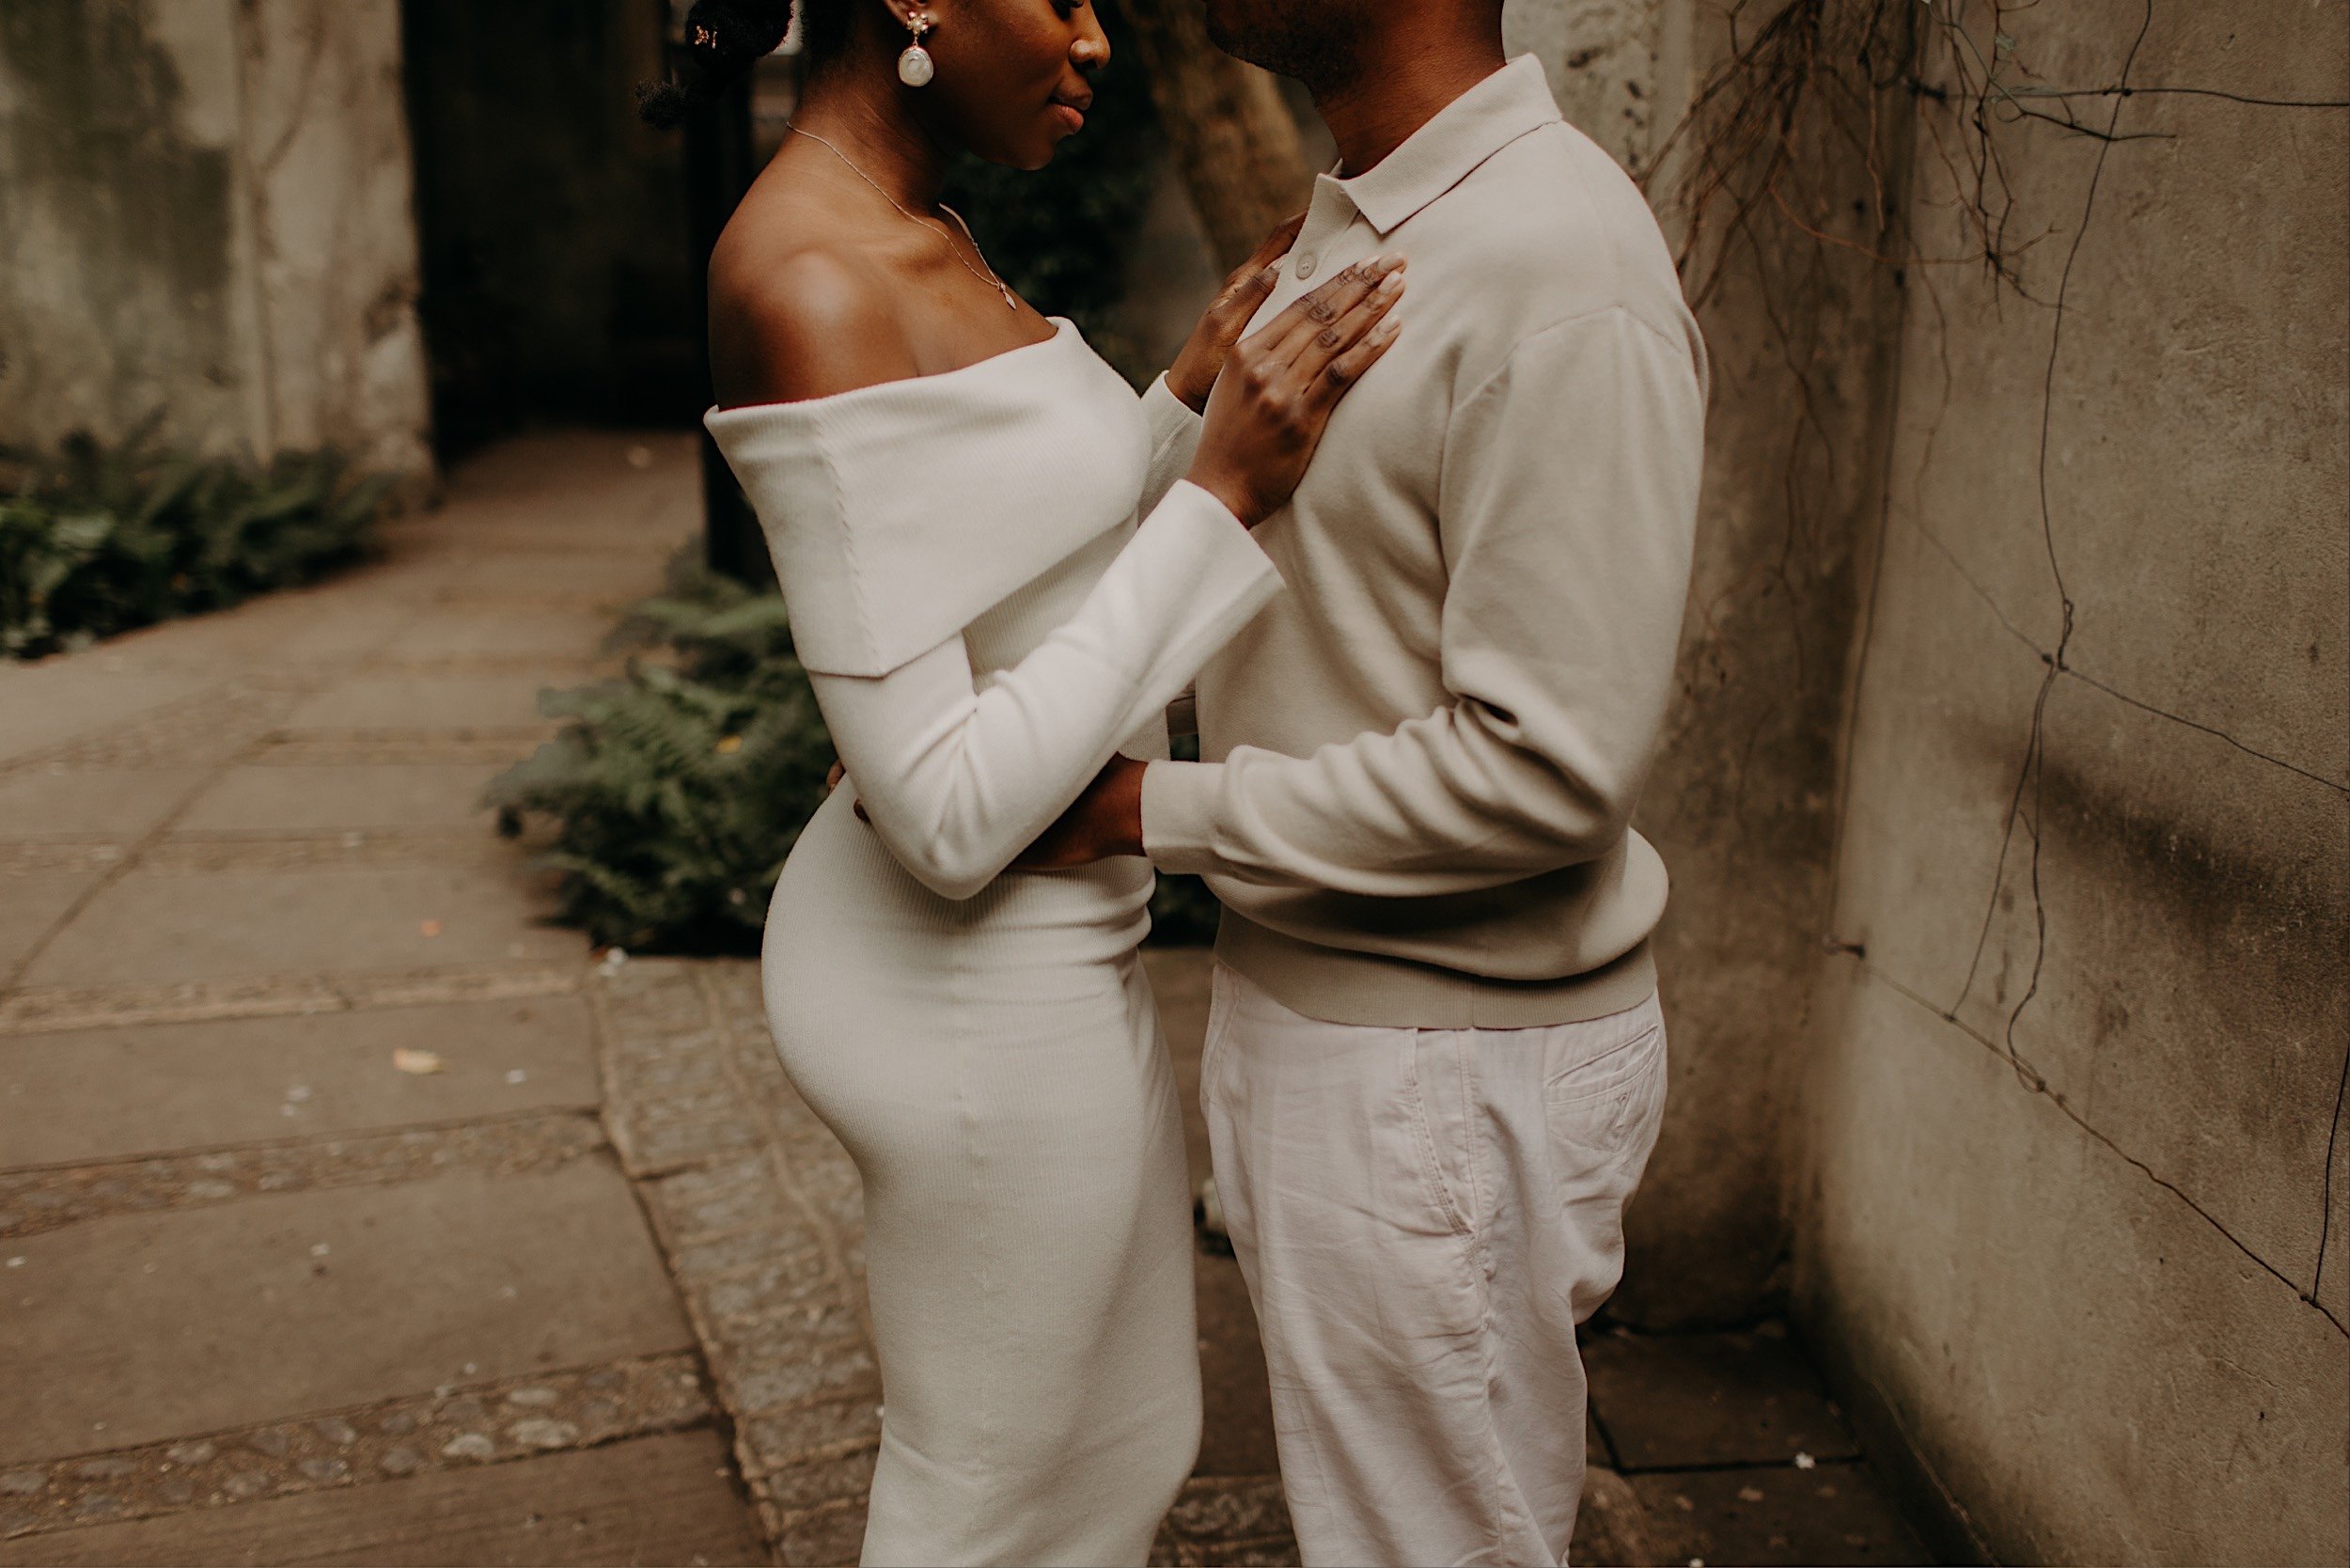 11_St-Dunstans-in-the-east-pre-wedding-shoot0016_Gorgeous black model couple in love share intimate moment in st dunstan in the east.jpg